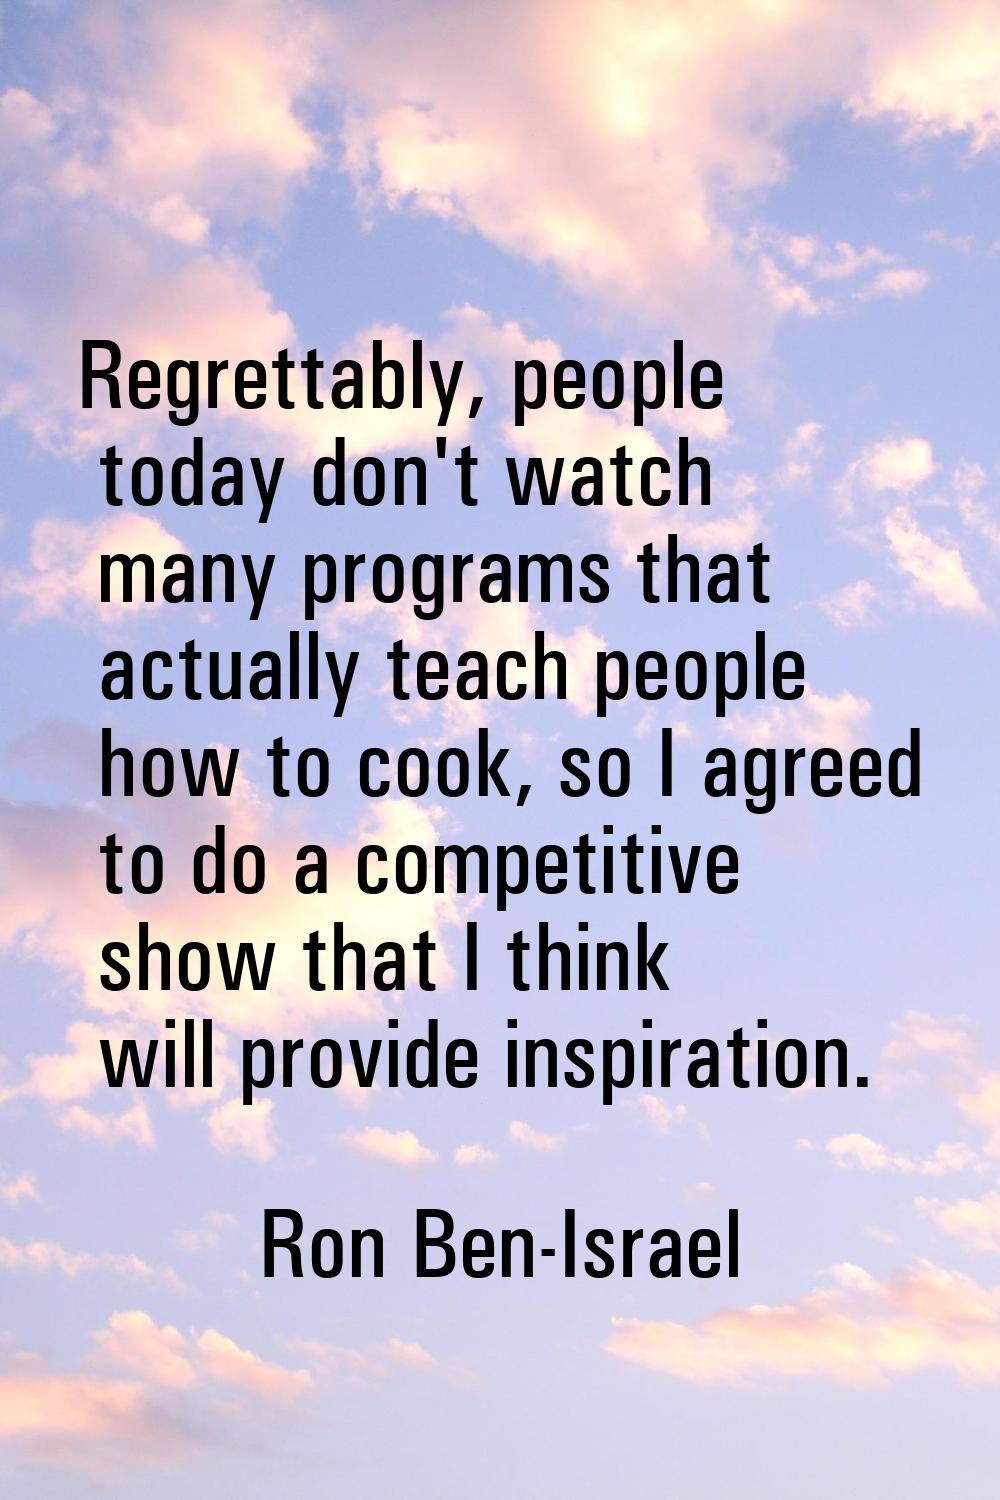 Regrettably, people today don't watch many programs that actually teach people how to cook, so I ag